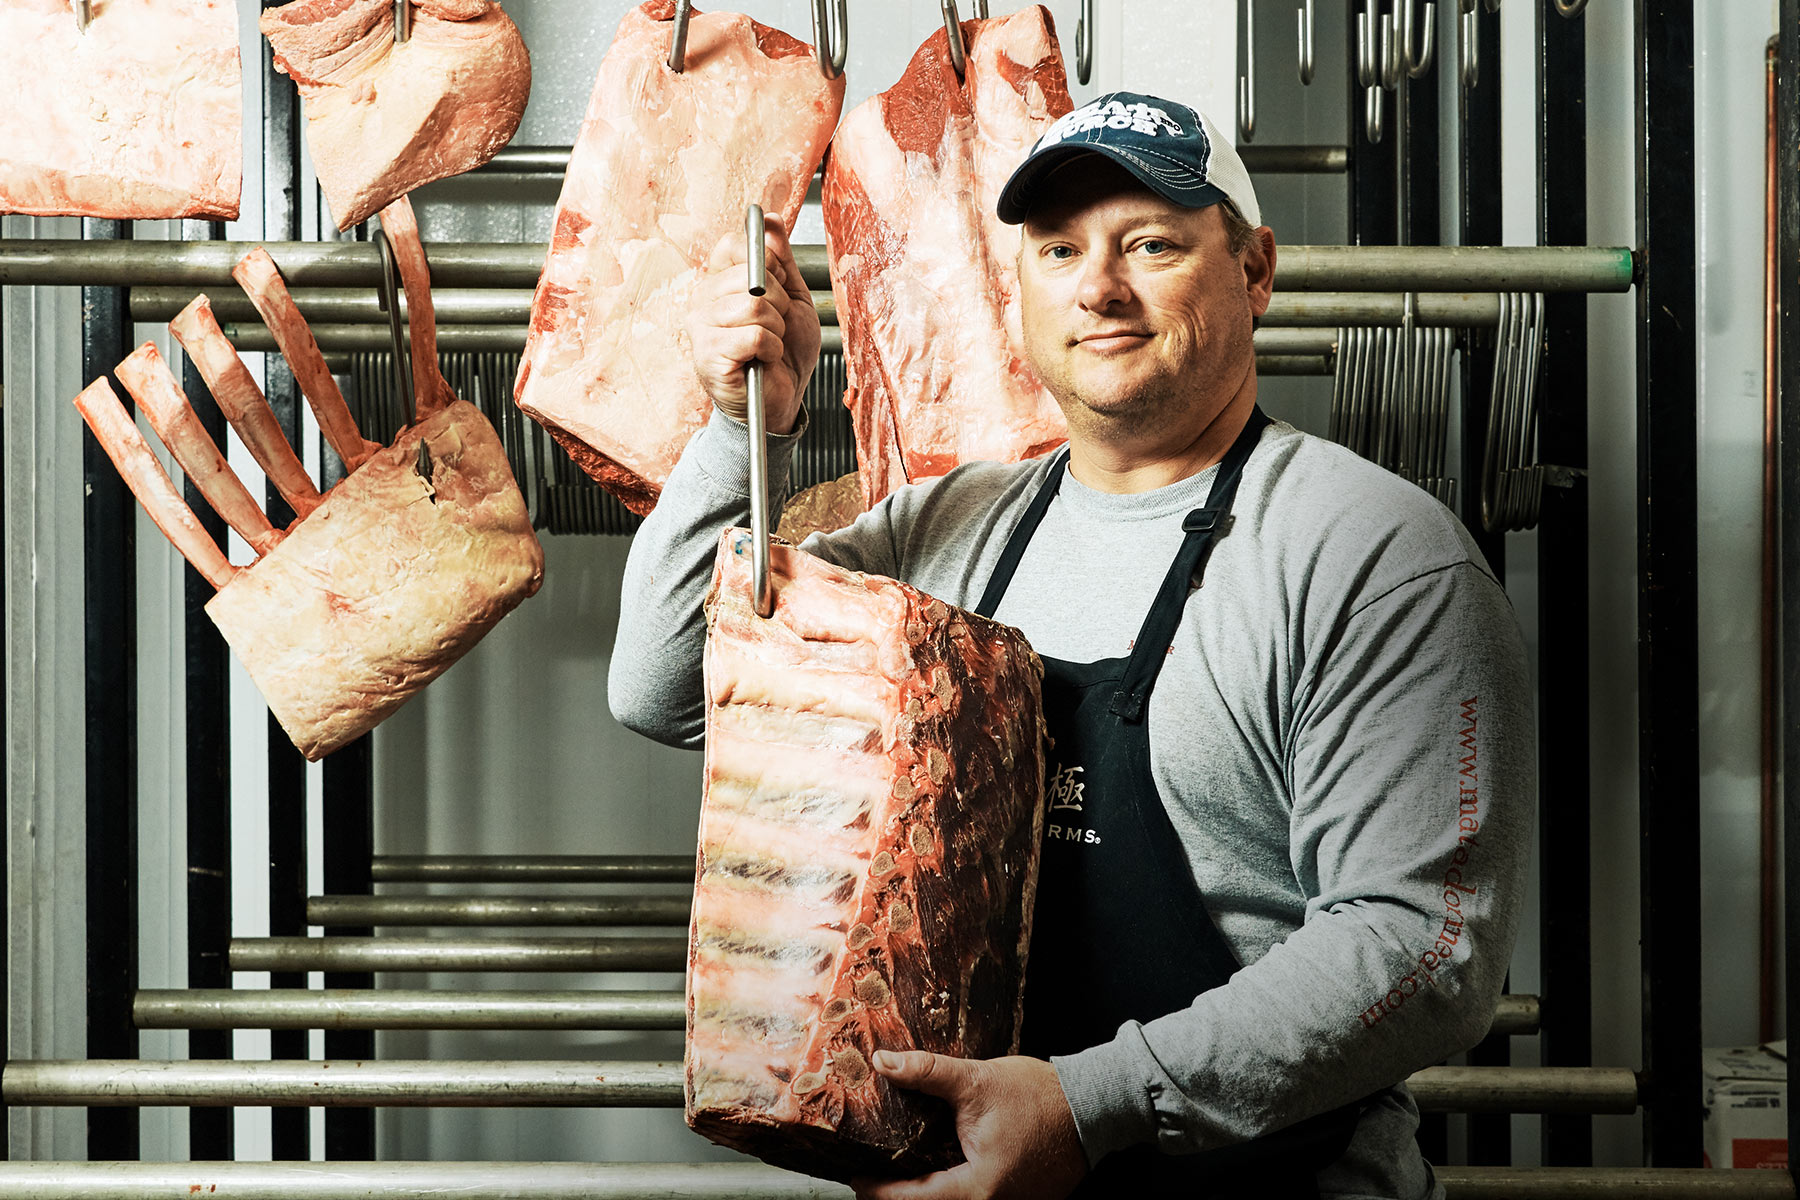 Butcher near me now | Welcome to Von Hanson's Meats. 2020 ...